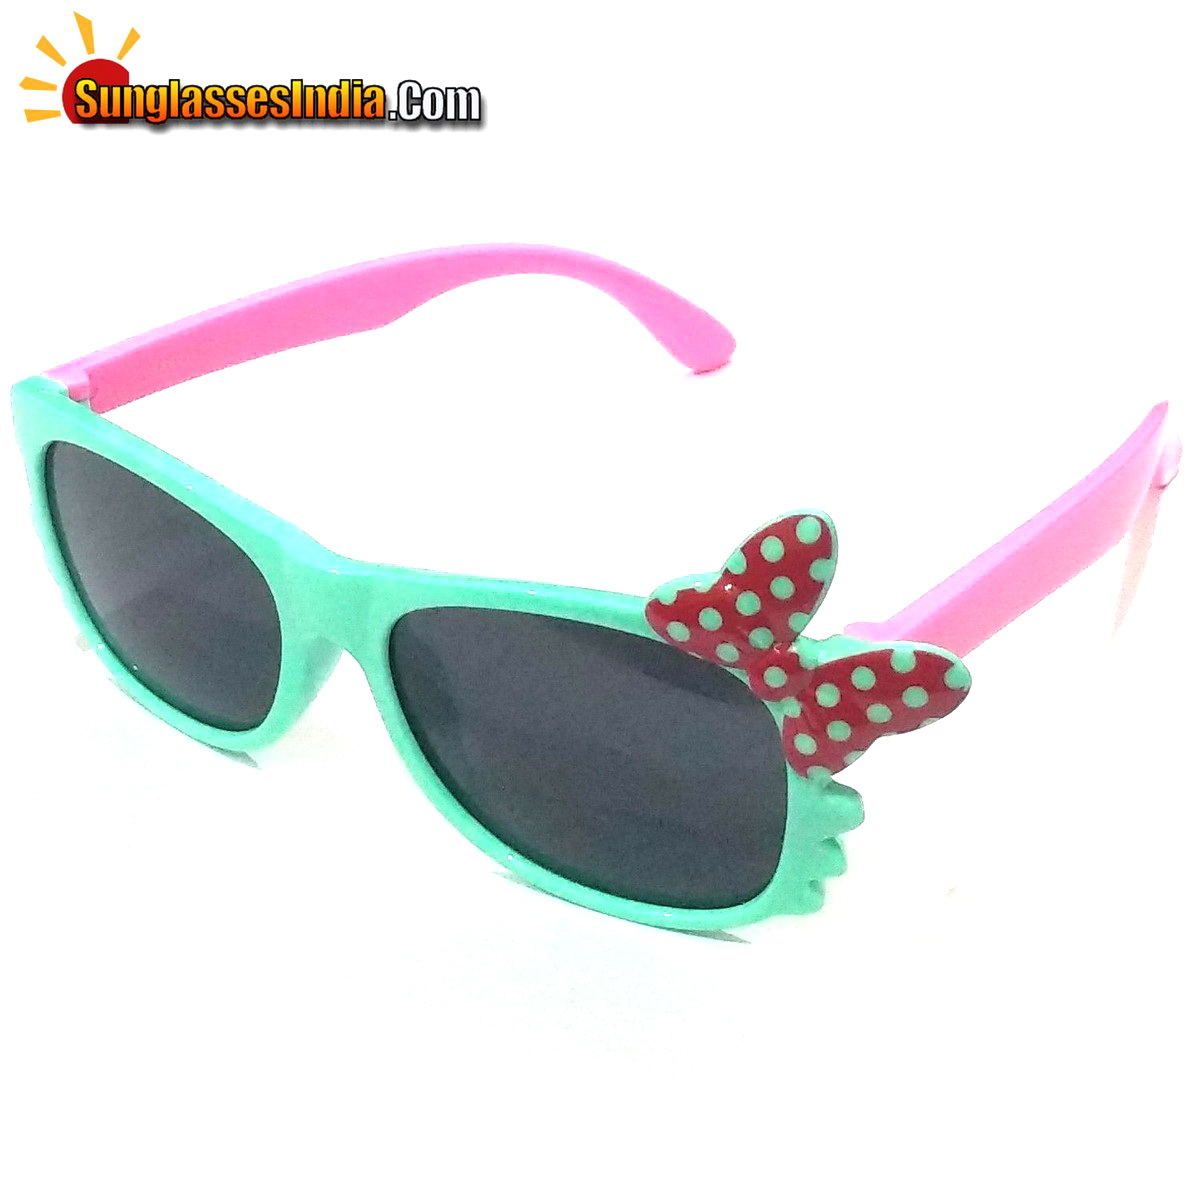 Unbreakable Kids Polarized Sunglasses Light Weight TR Material S8170GreenPink